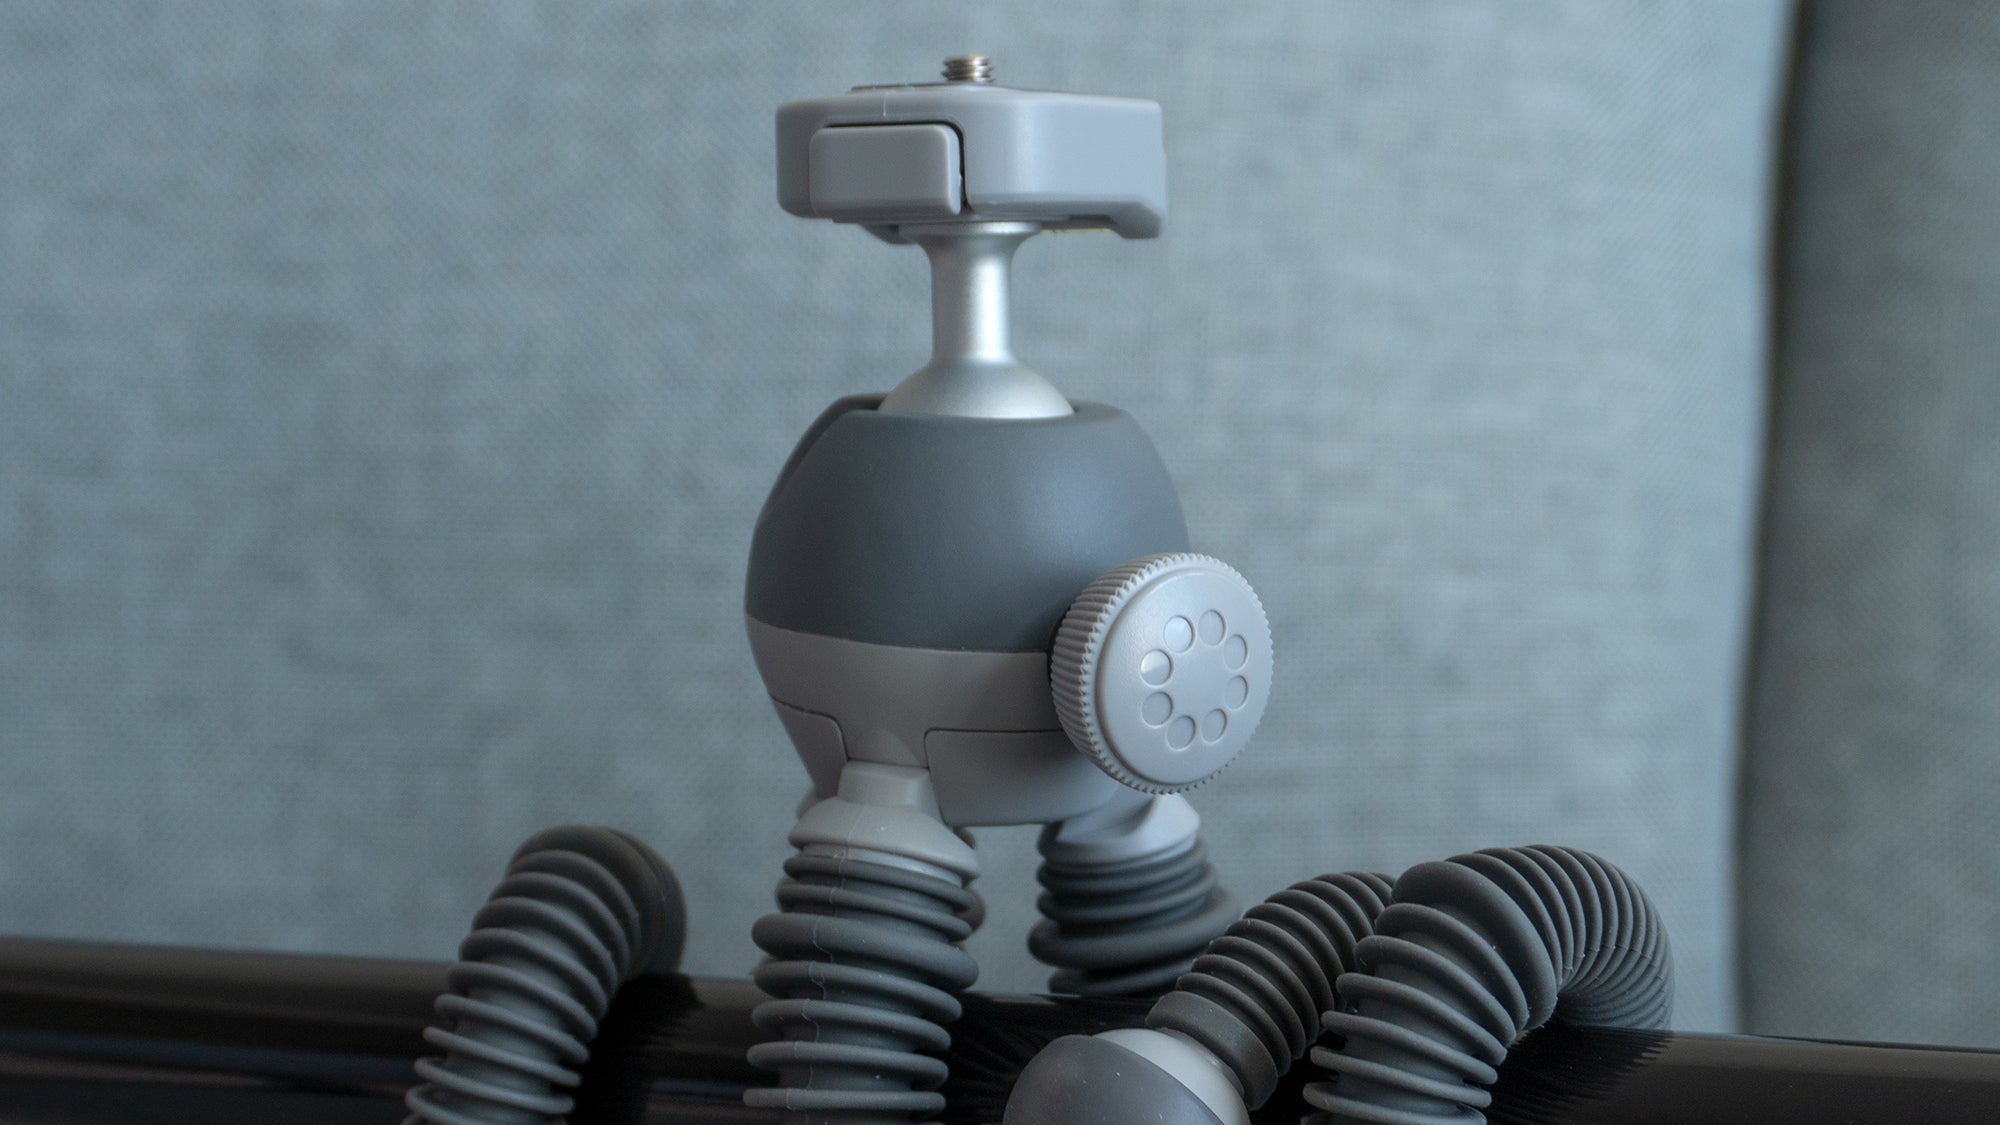 The larger PodZilla features an adjustable tightening knob to prevent the ball and socket joint from coming loose with a heavier camera attached. (Photo: Andrew Liszewski - Gizmodo)